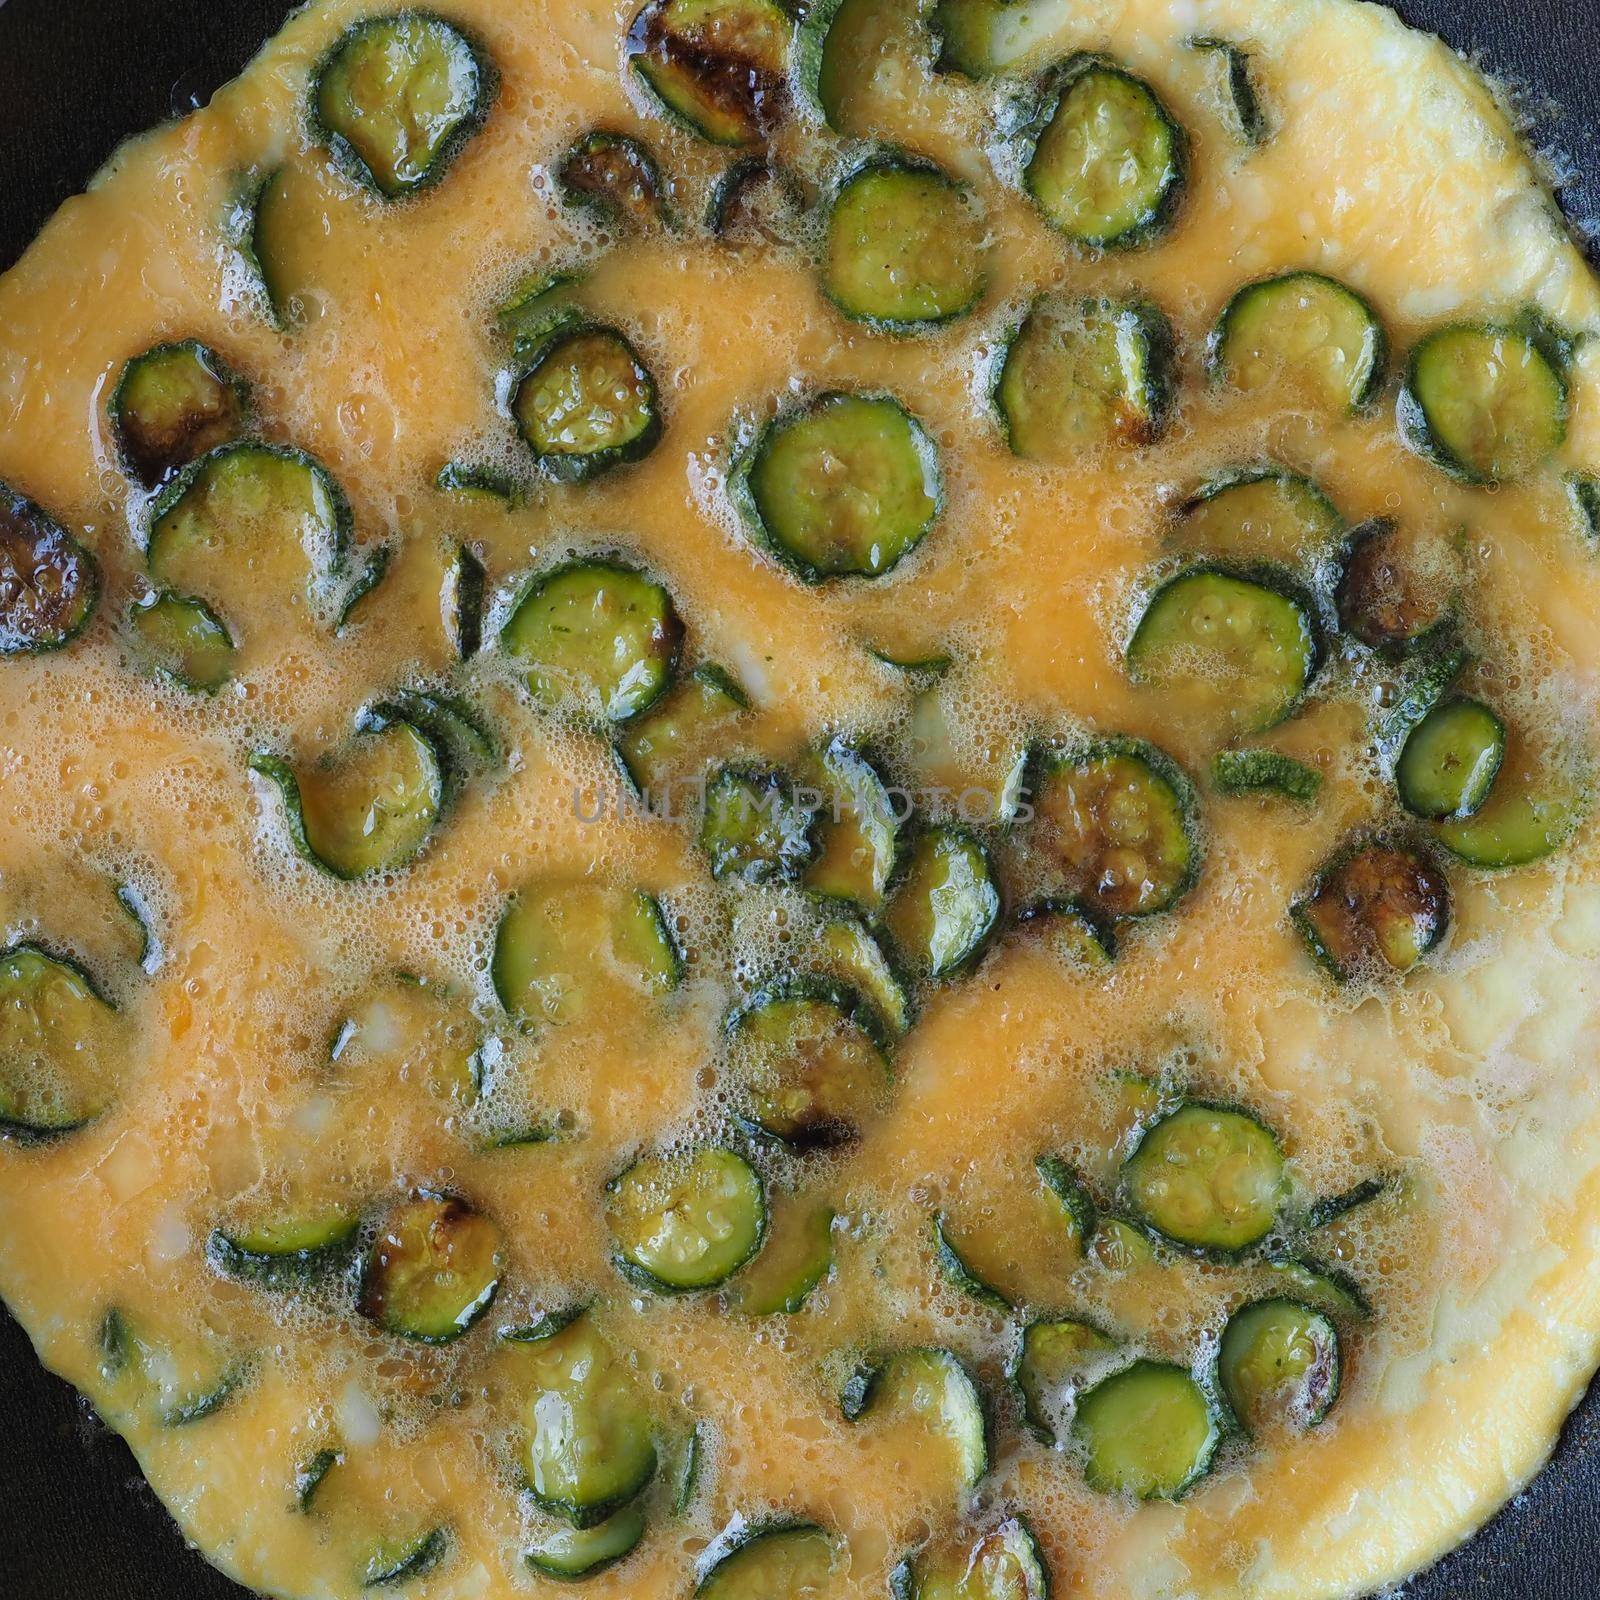 omelet made with eggs and zucchini vegetables